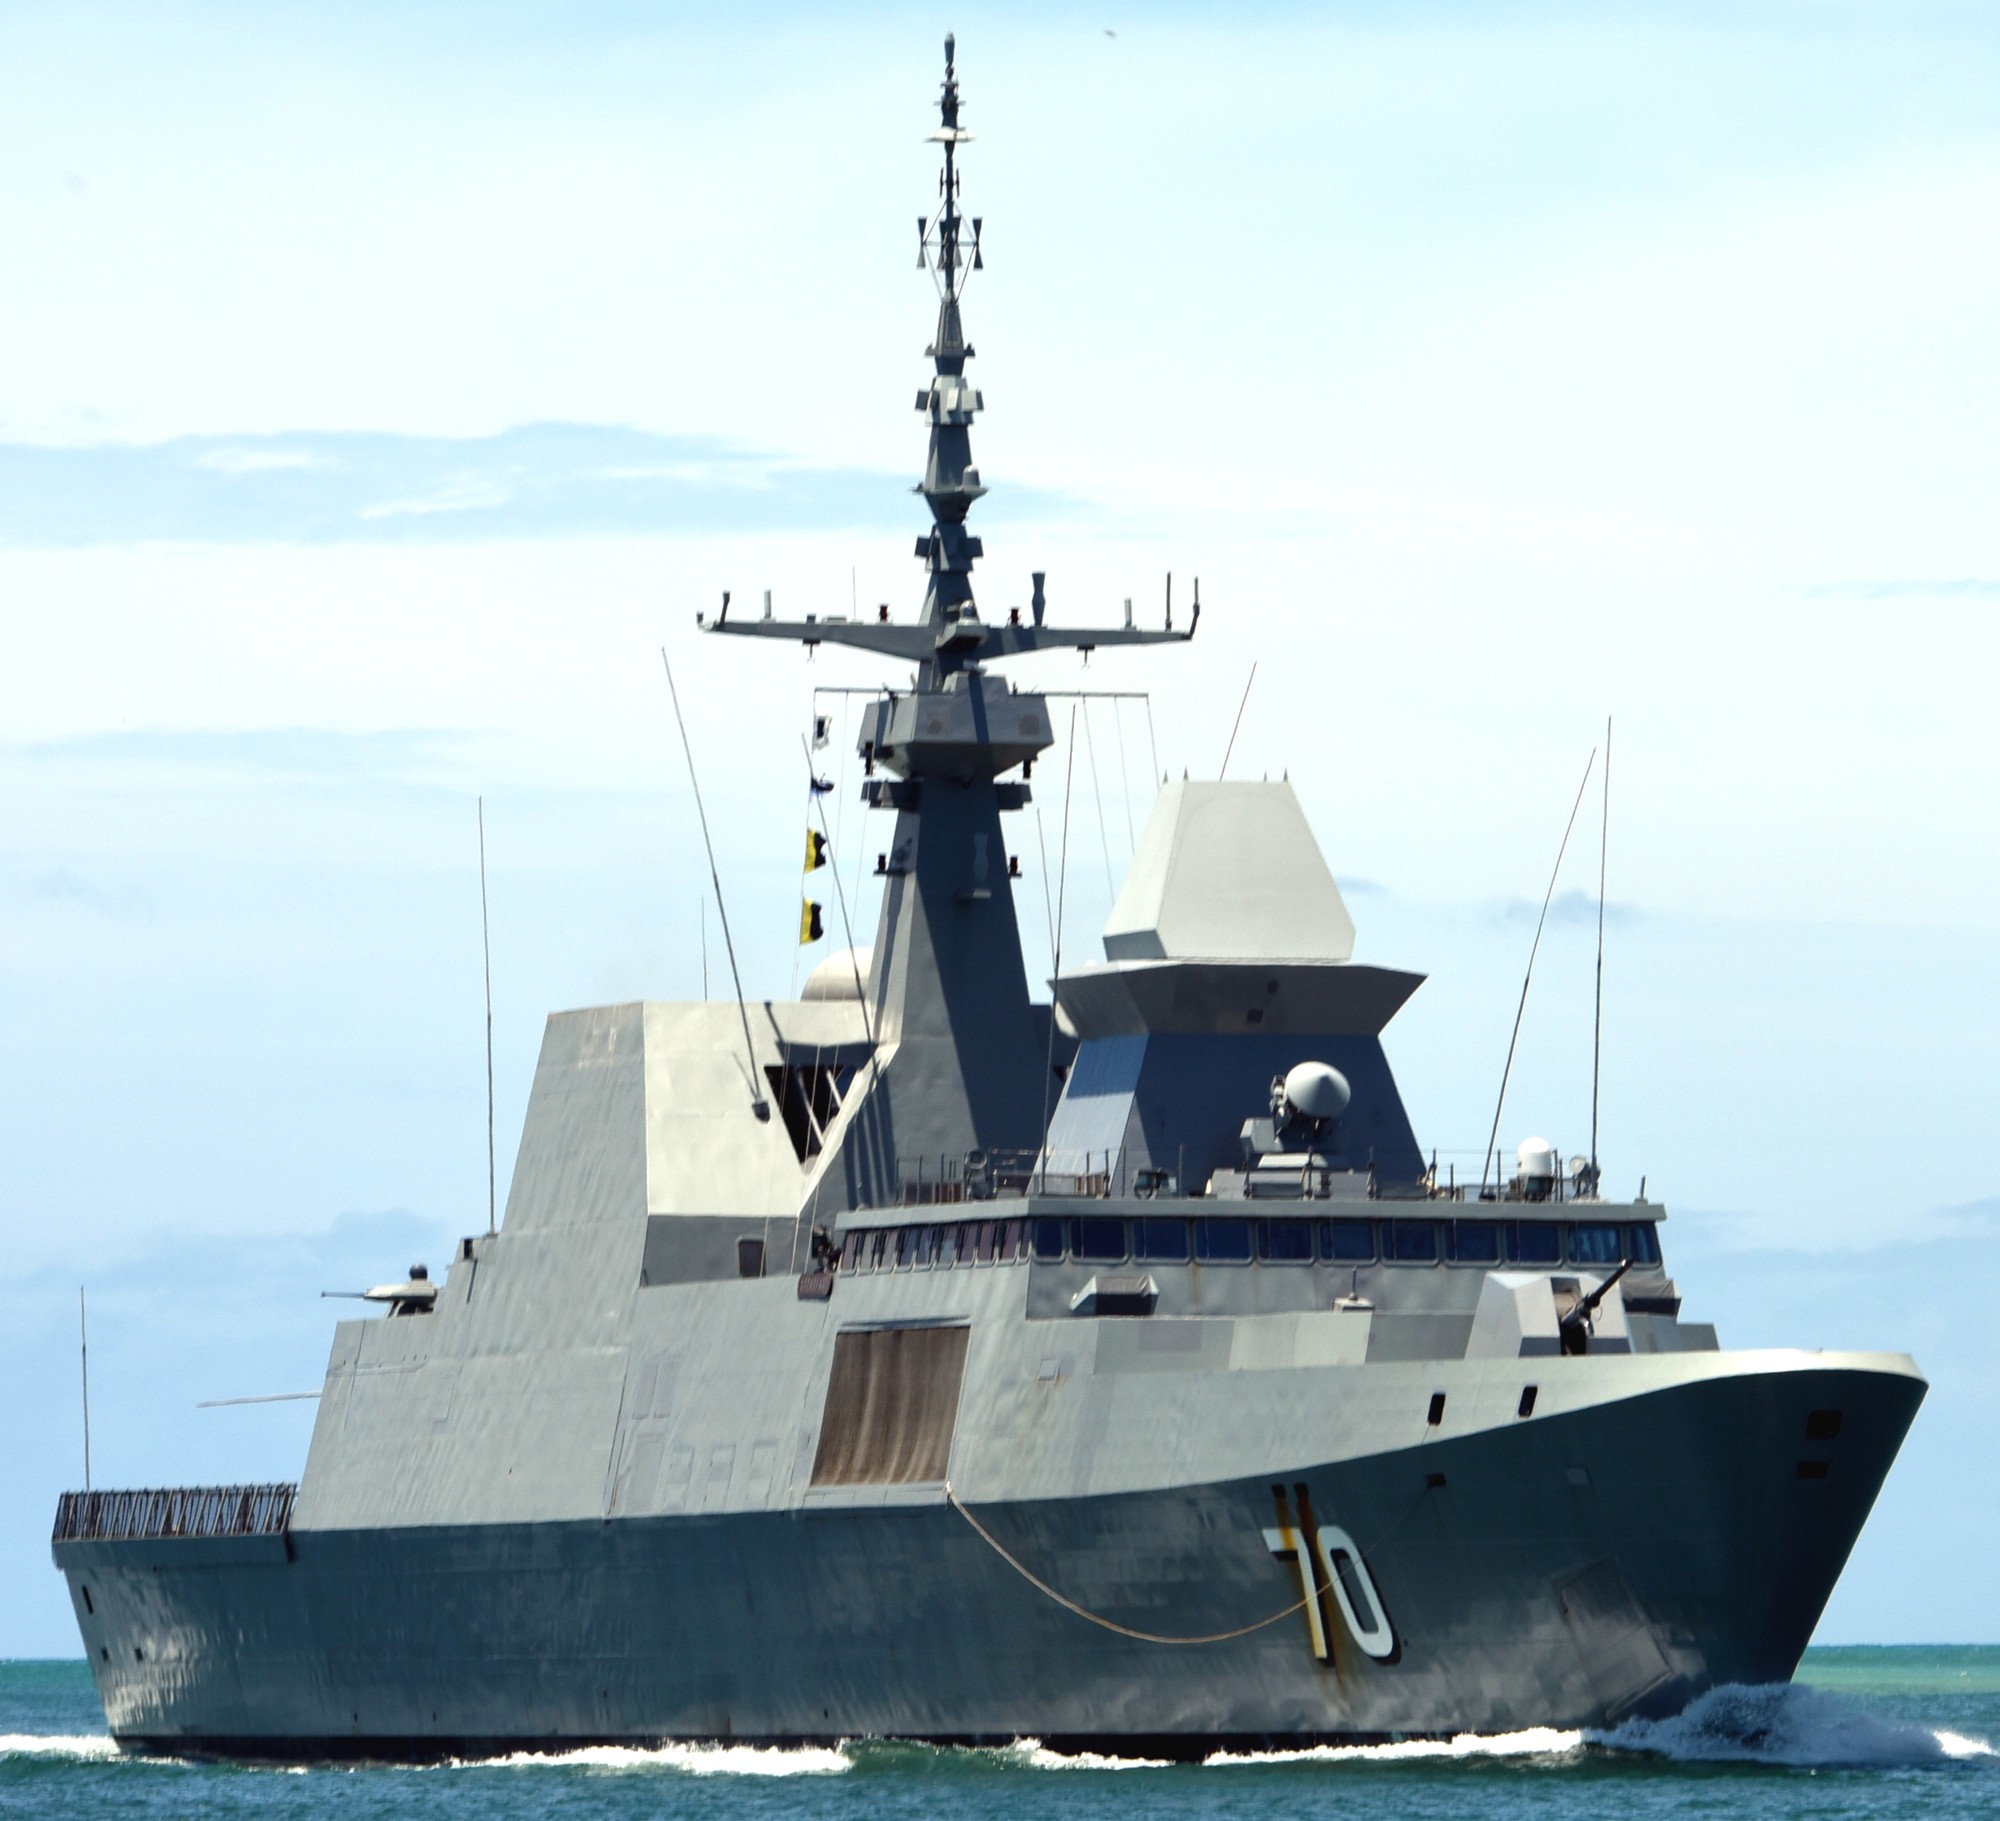 70 rss steadfast formidable class multi-mission missile frigate ffg republic singapore navy 22